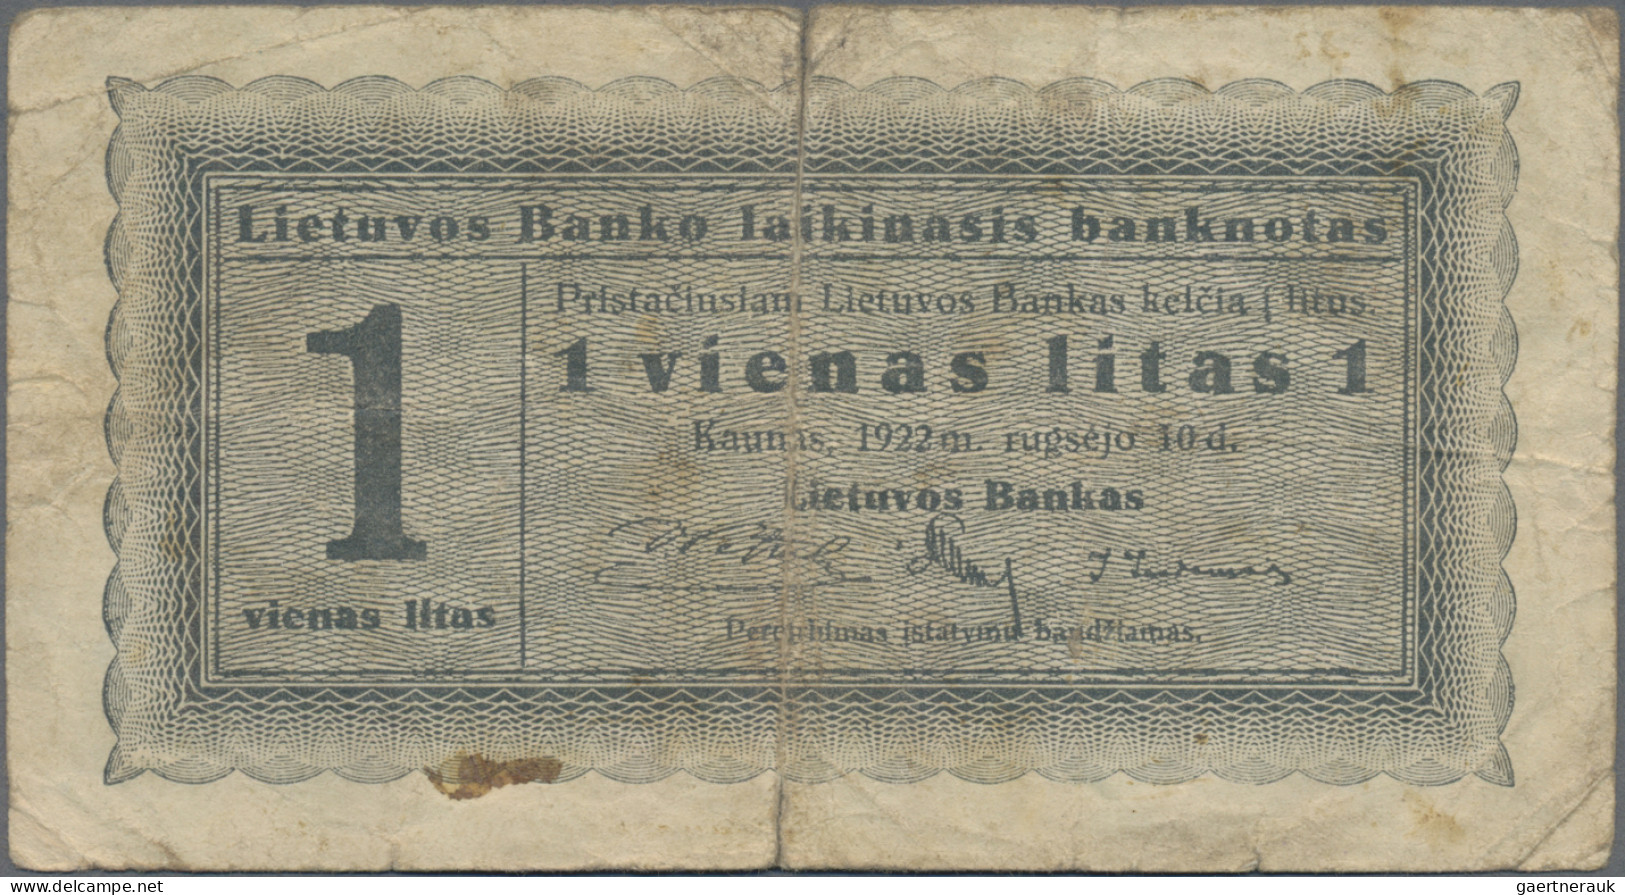 Lithuania: Very nice set with 5 banknotes, series 1922, comprising 1 Centas (P.1